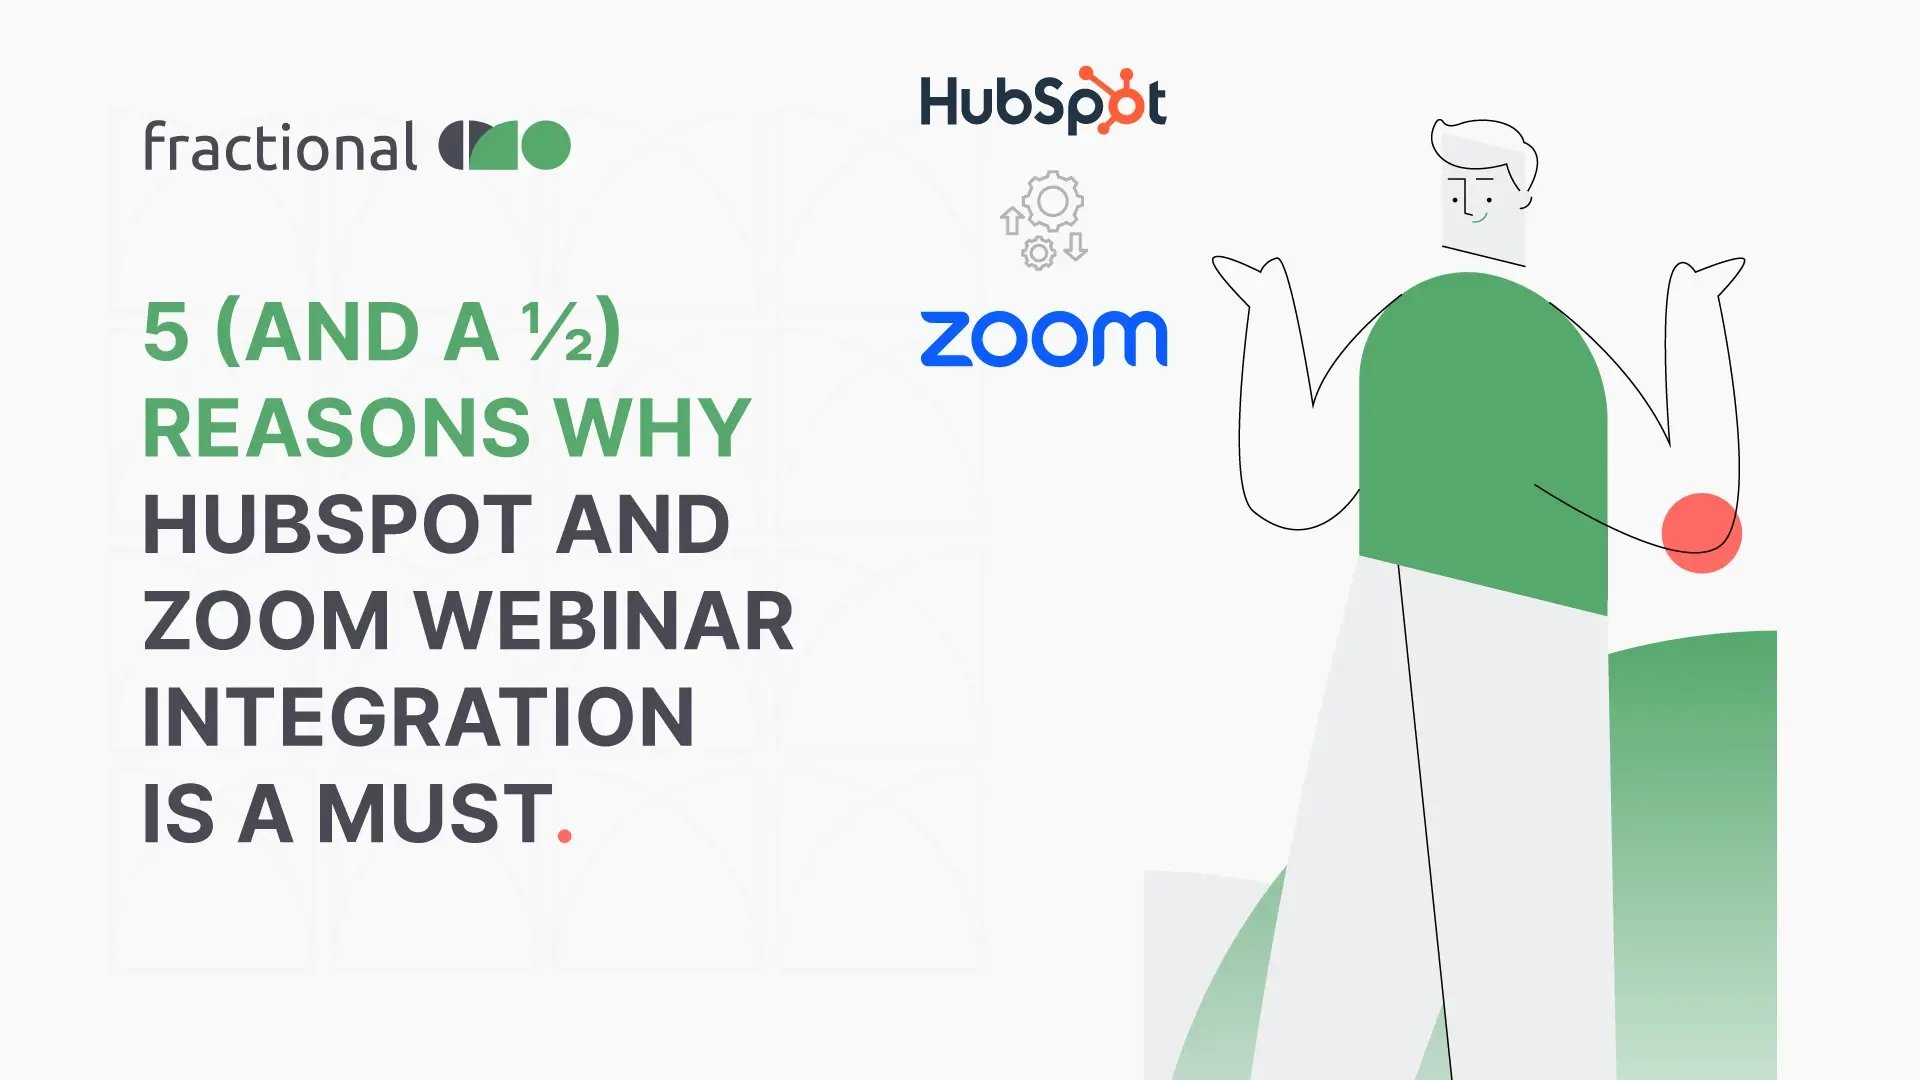 5 (And a 1/2) Reasons Why HubSpot and Zoom Webinar Integration is a Must.